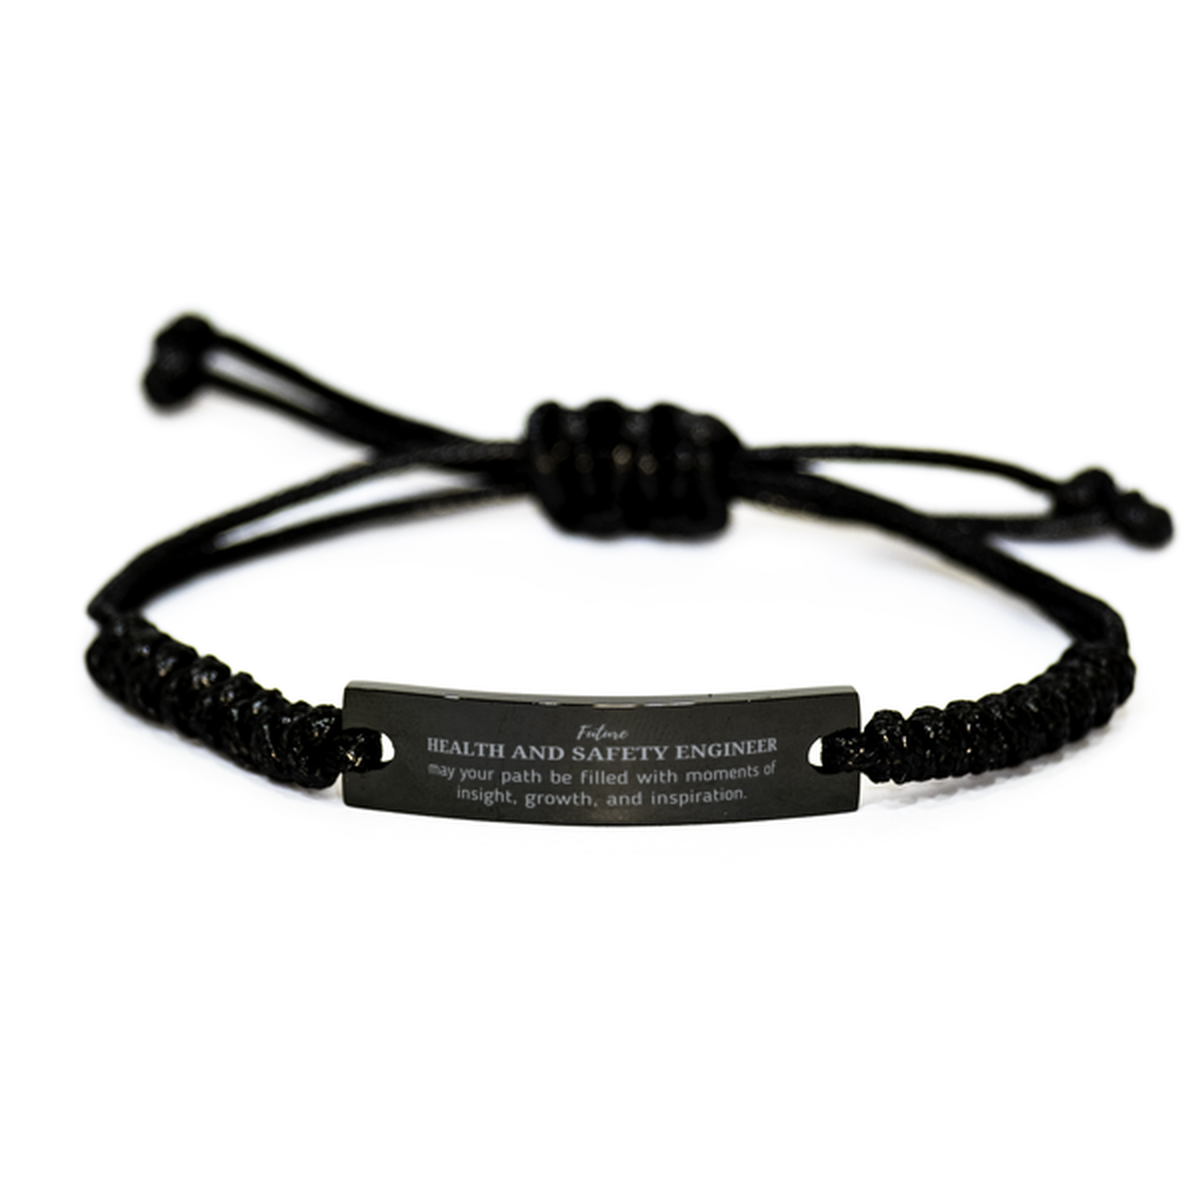 Future Health and Safety Engineer Gifts, May your path be filled with moments of insight, Graduation Gifts for New Health and Safety Engineer, Christmas Unique Black Rope Bracelet For Men, Women, Friends